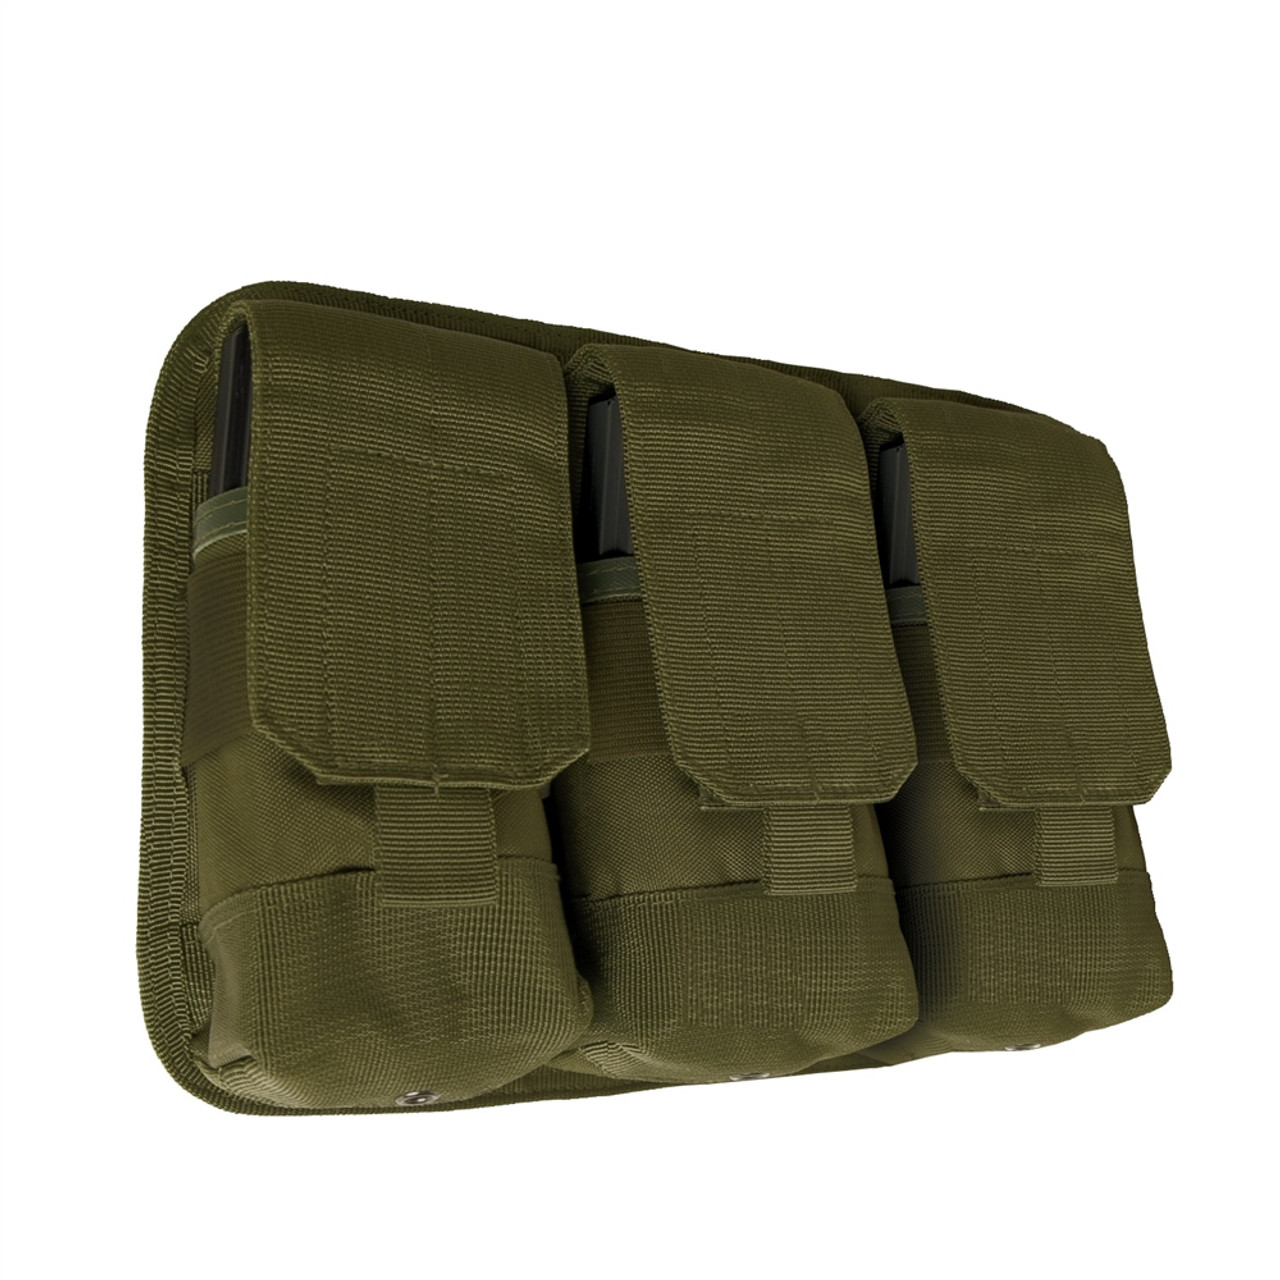 M.O.L.L.E. Universal Triple Magazine Rifle Pouch from Hessen Tactical.